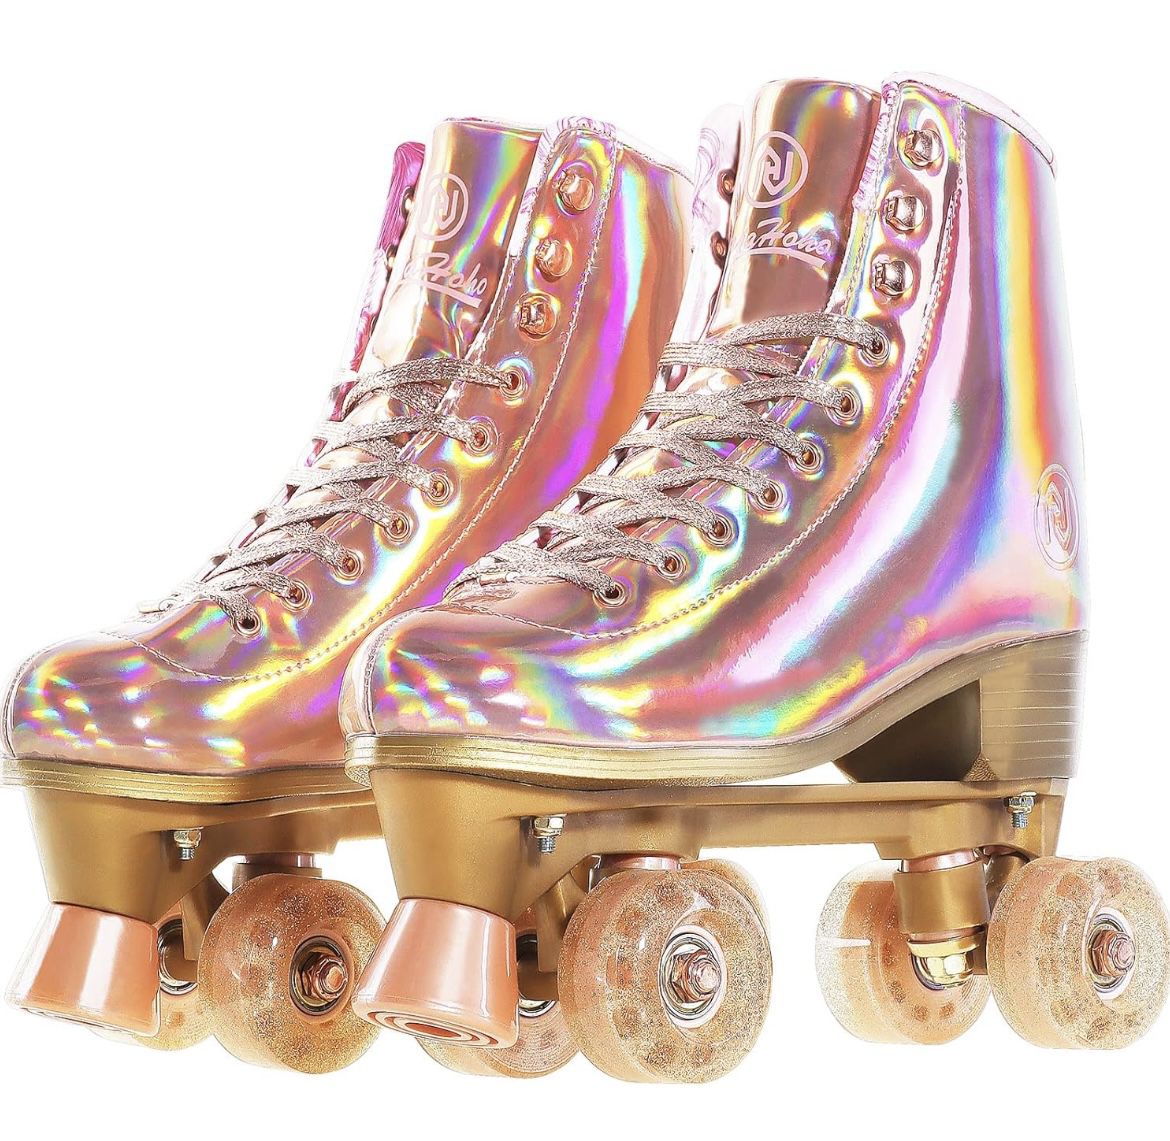 Roller Skates for Women, Holographic High Top PU Leather Rollerskates, Shiny Double-Row Four Wheels Quad Skates for Girls and Age 8-50 Indoor (Pink Ro